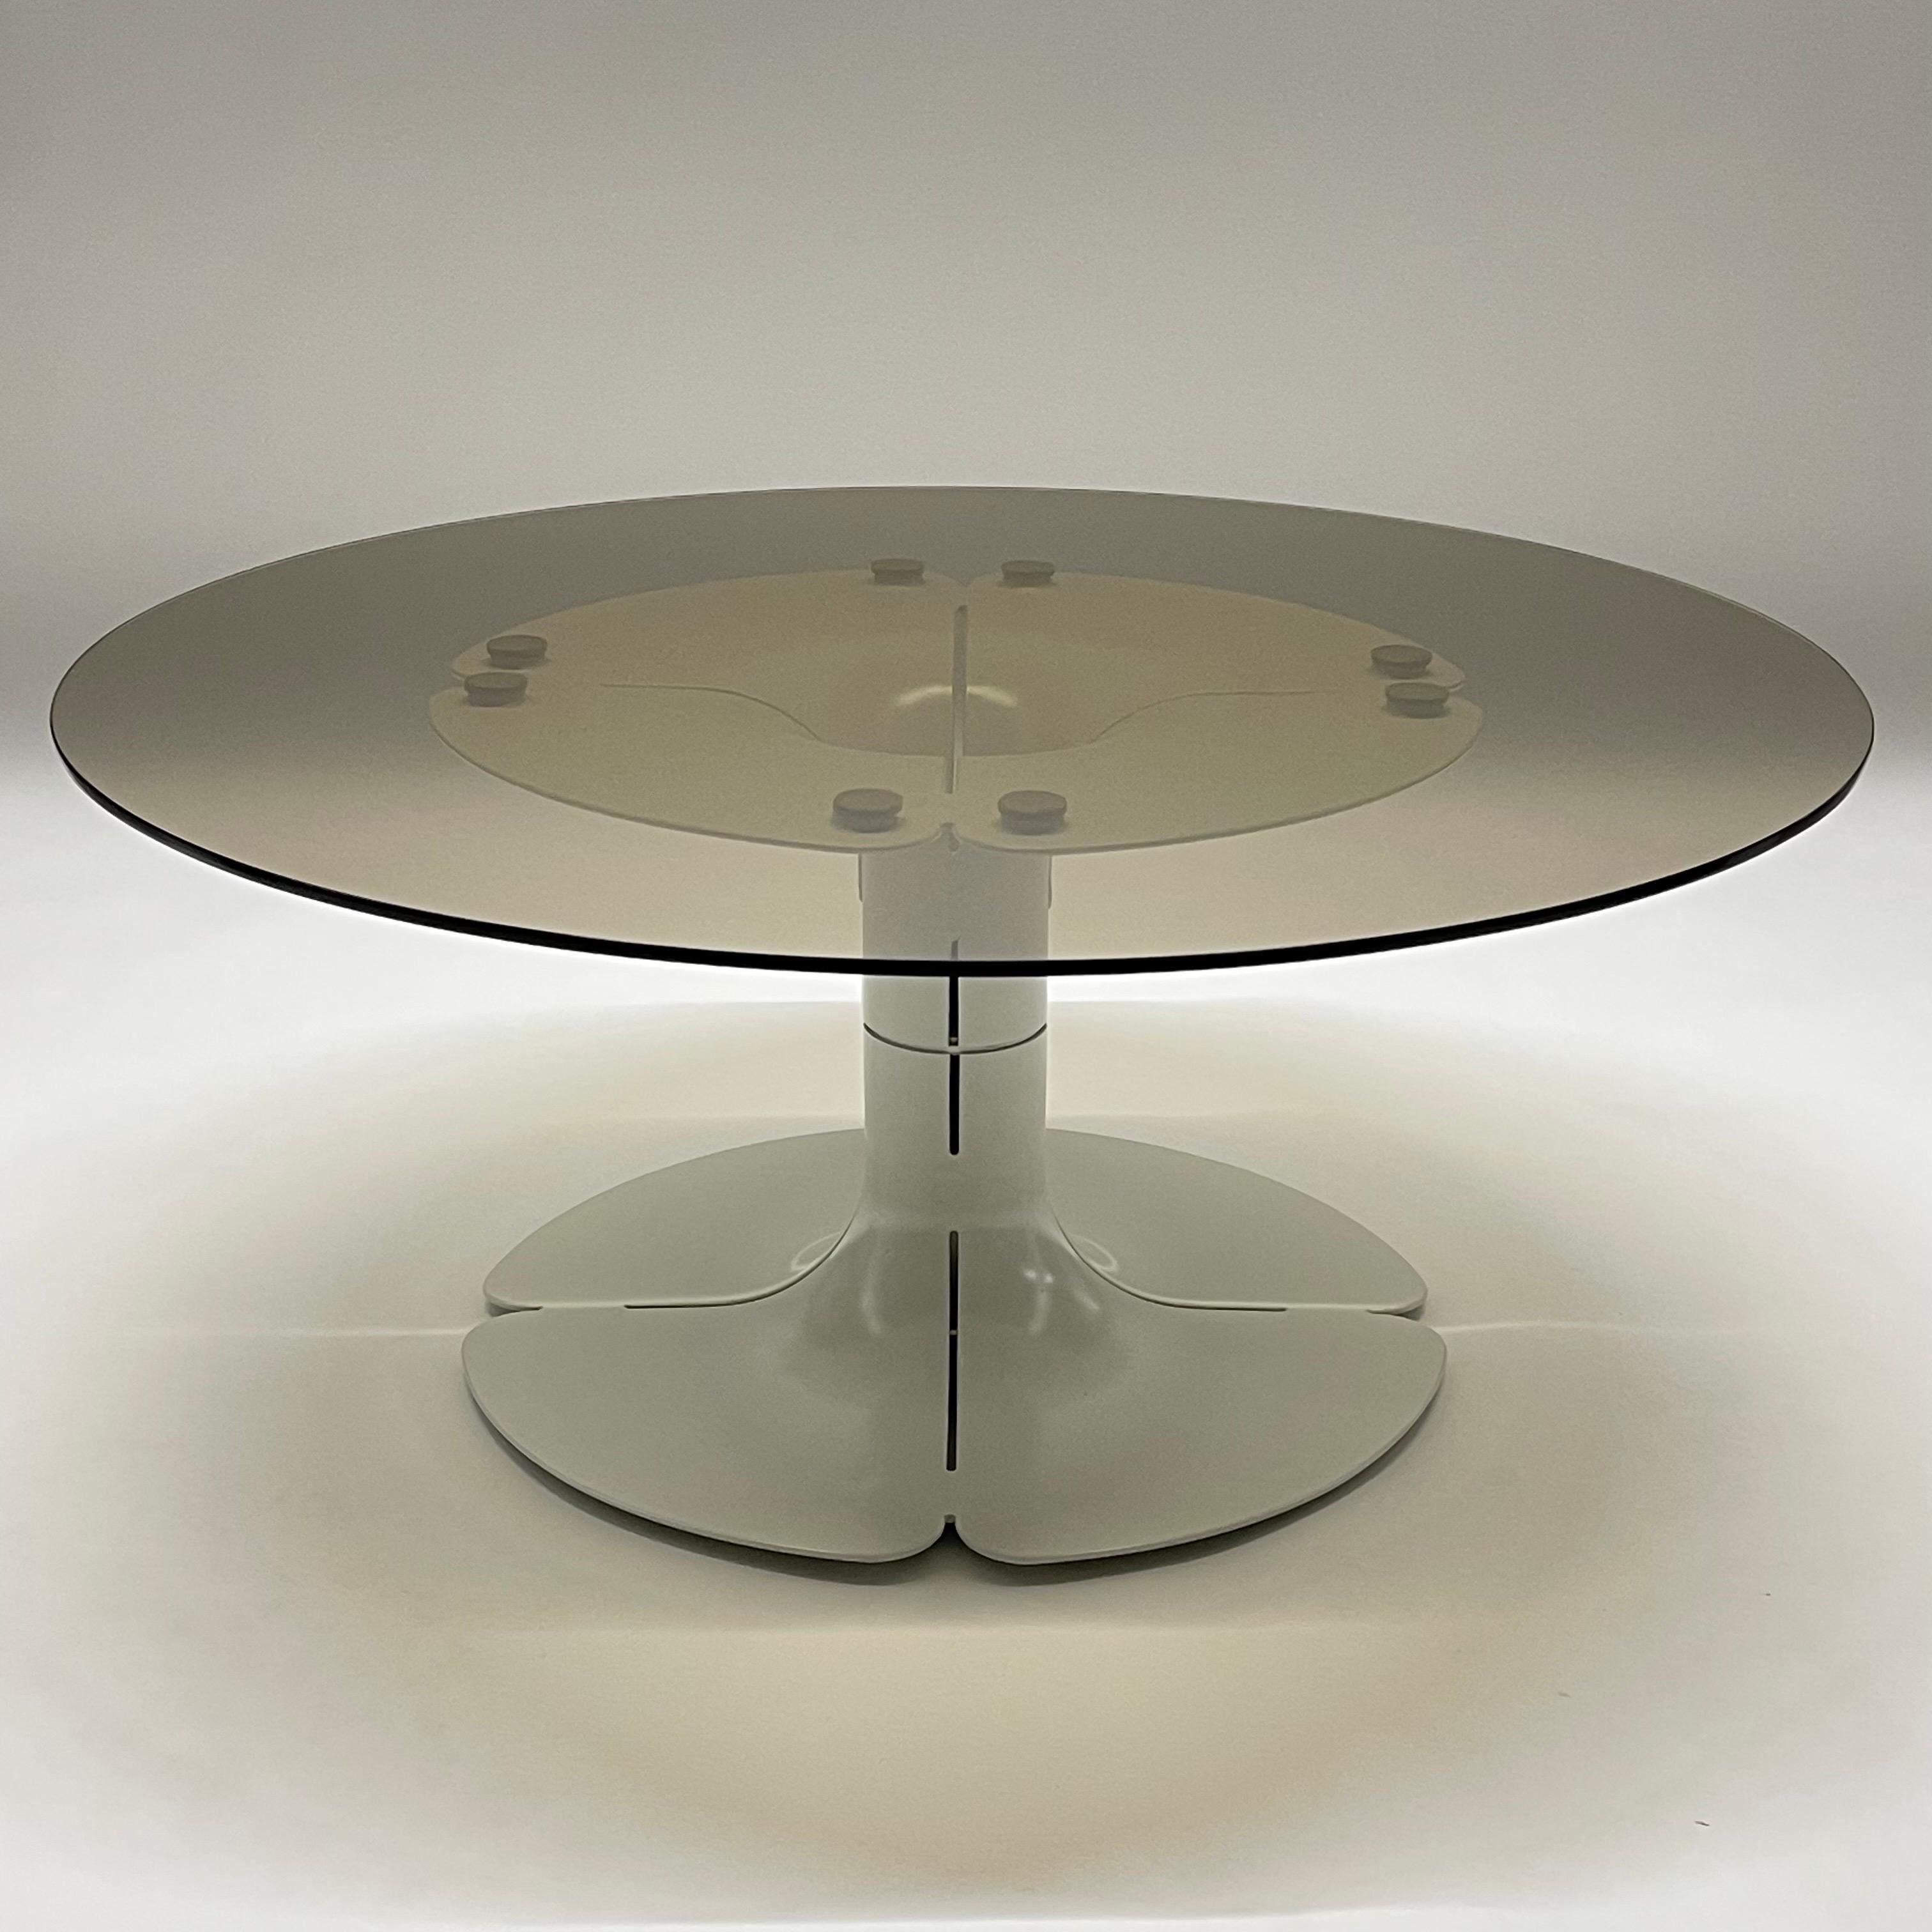 Rare and important Iconic 20th century design Élysée low table, coffee or cocktail table. This piece is an edition of the design by Pierre Paulin for the Private Living Room of President Georges Pompidou and his wife Claude at the Palais de L'Élysée